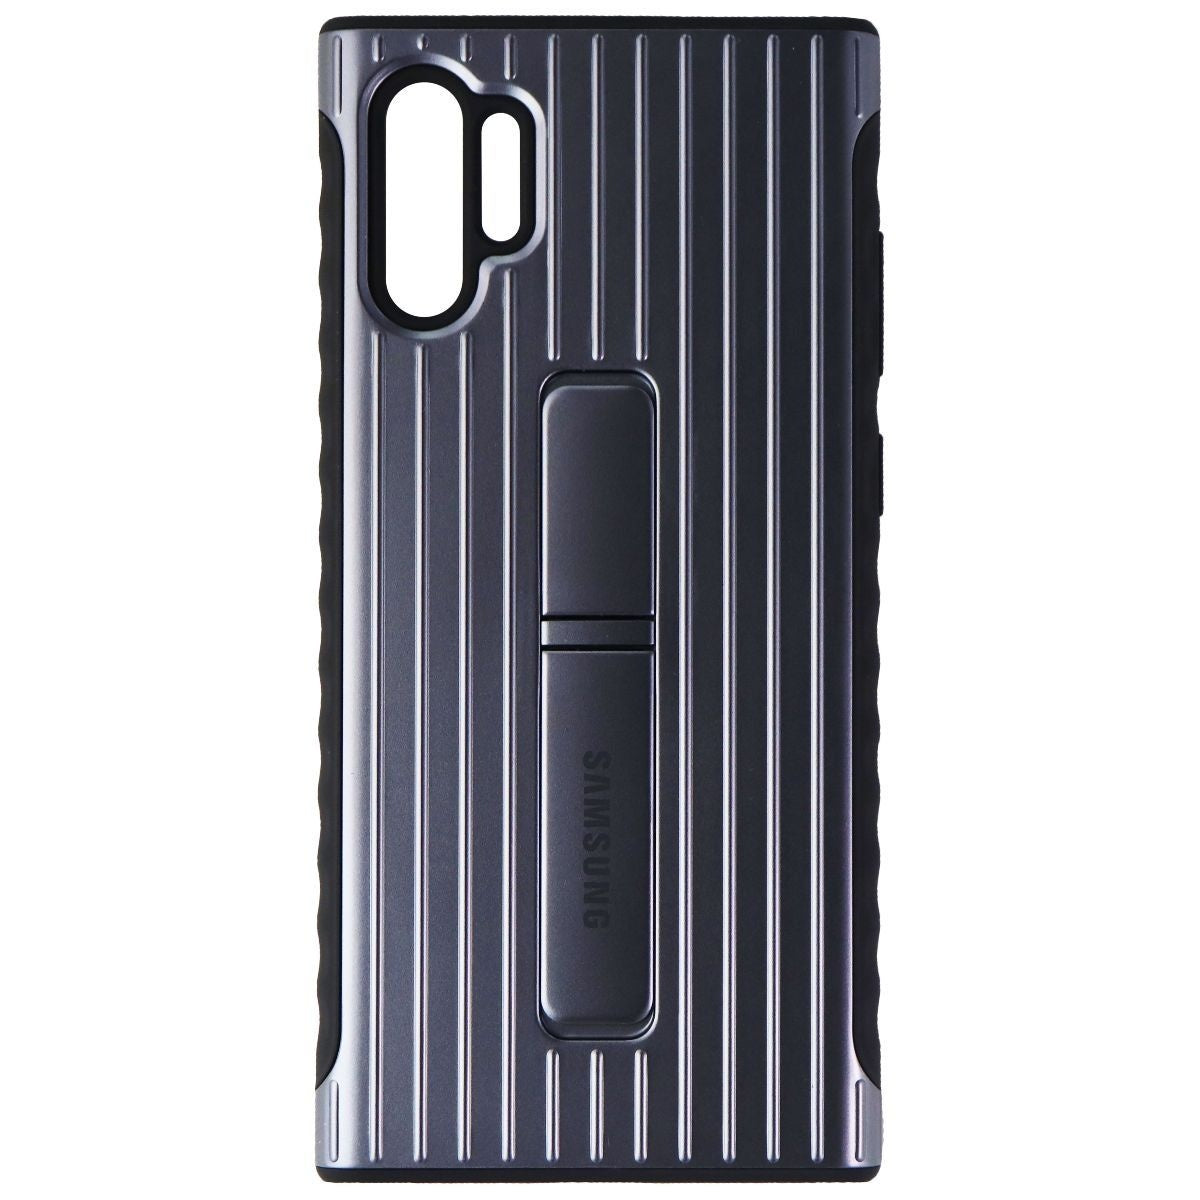 DO NOT USE - Double Check Family P5872 Cell Phone - Cases, Covers & Skins Samsung    - Simple Cell Bulk Wholesale Pricing - USA Seller